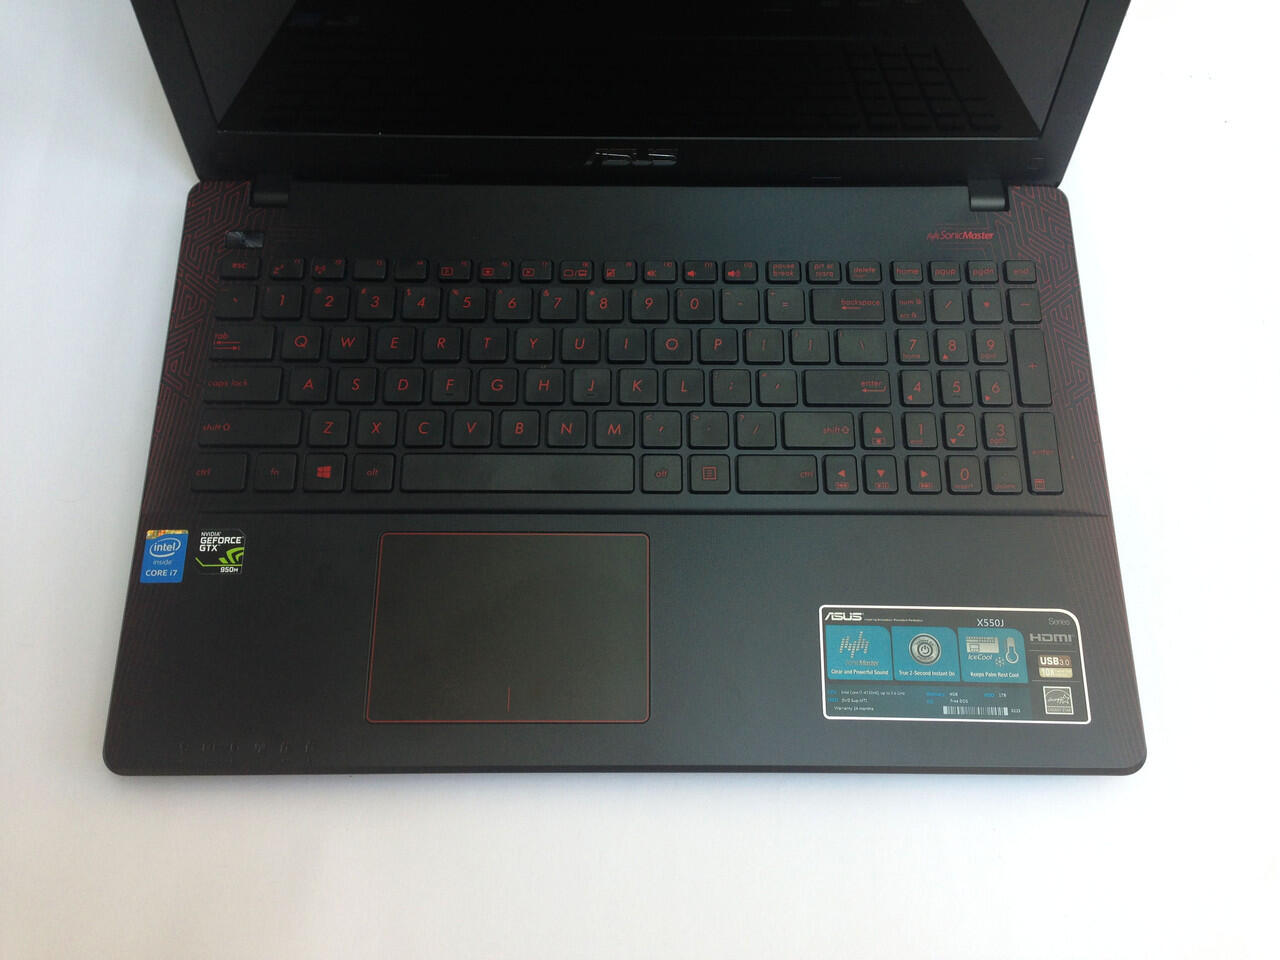 &#91;Notebook&#93; Review Asus X550JX - i7 4720HQ, GTX 950M 